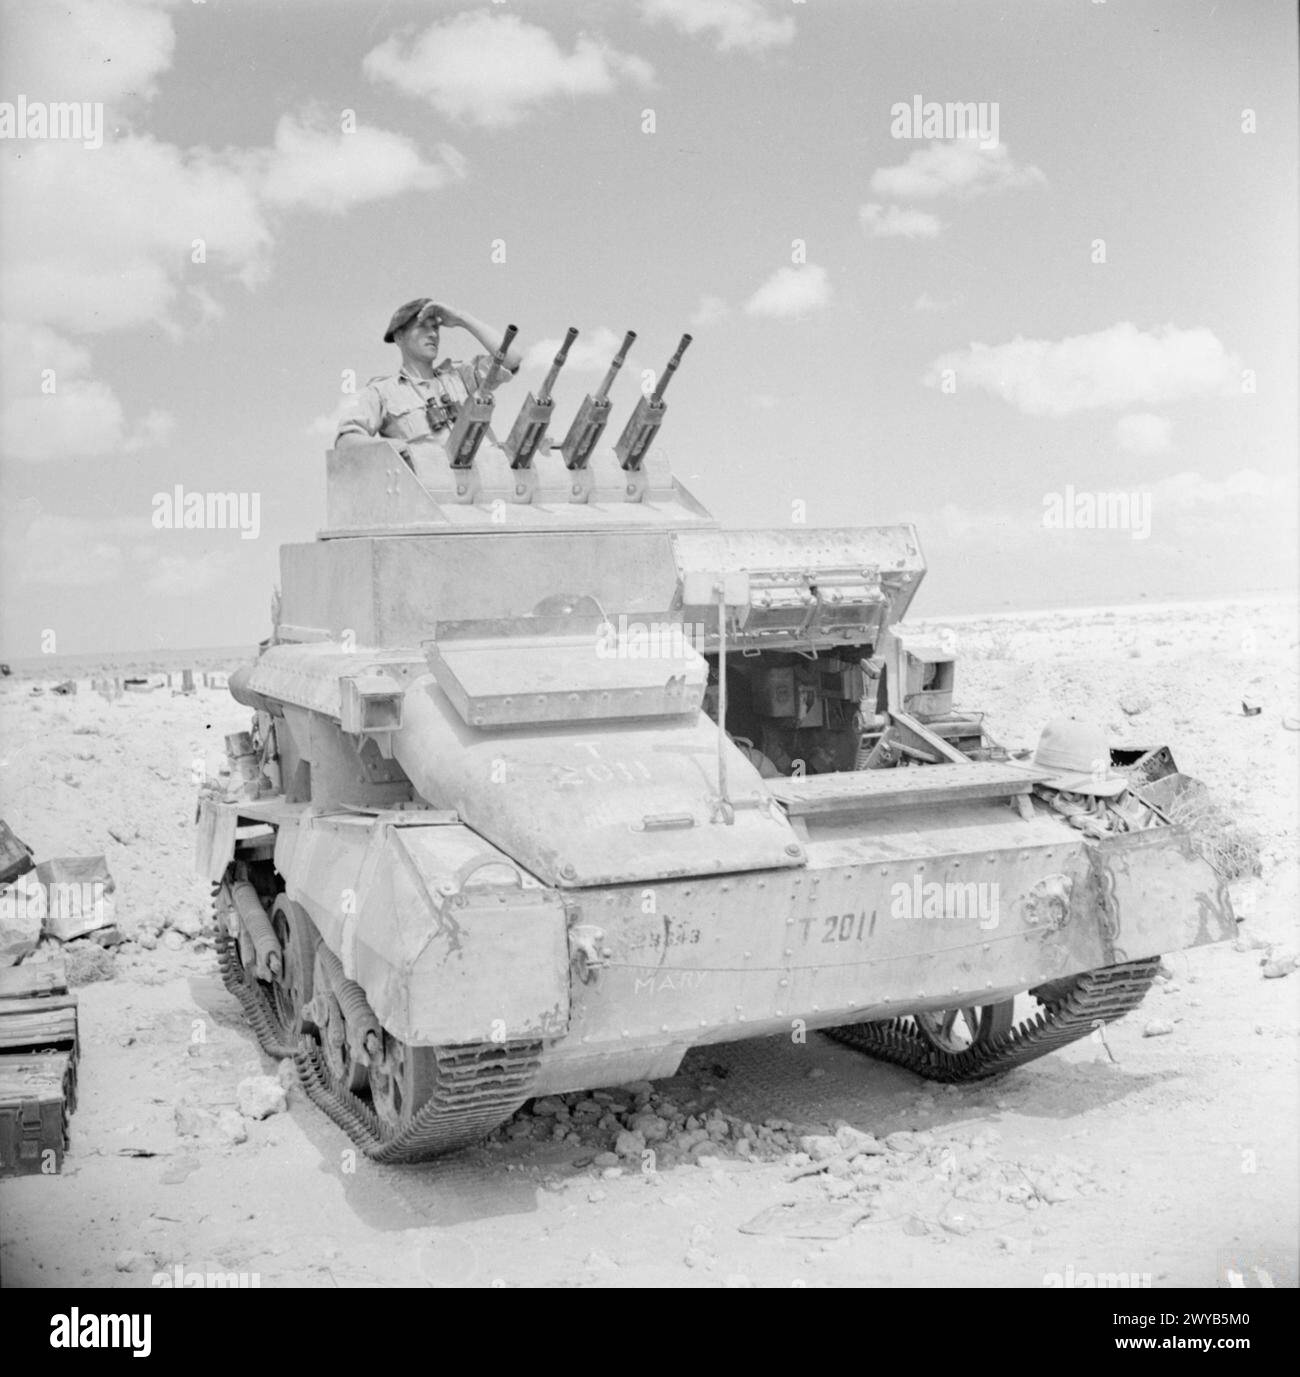 THE BRITISH ARMY IN NORTH AFRICA 1942 - Vickers Light Tank AA Mk 1, a stop-gap anti-aircraft tank armed with four 7.92mm Besa machine guns, 15 September 1942. , Stock Photo